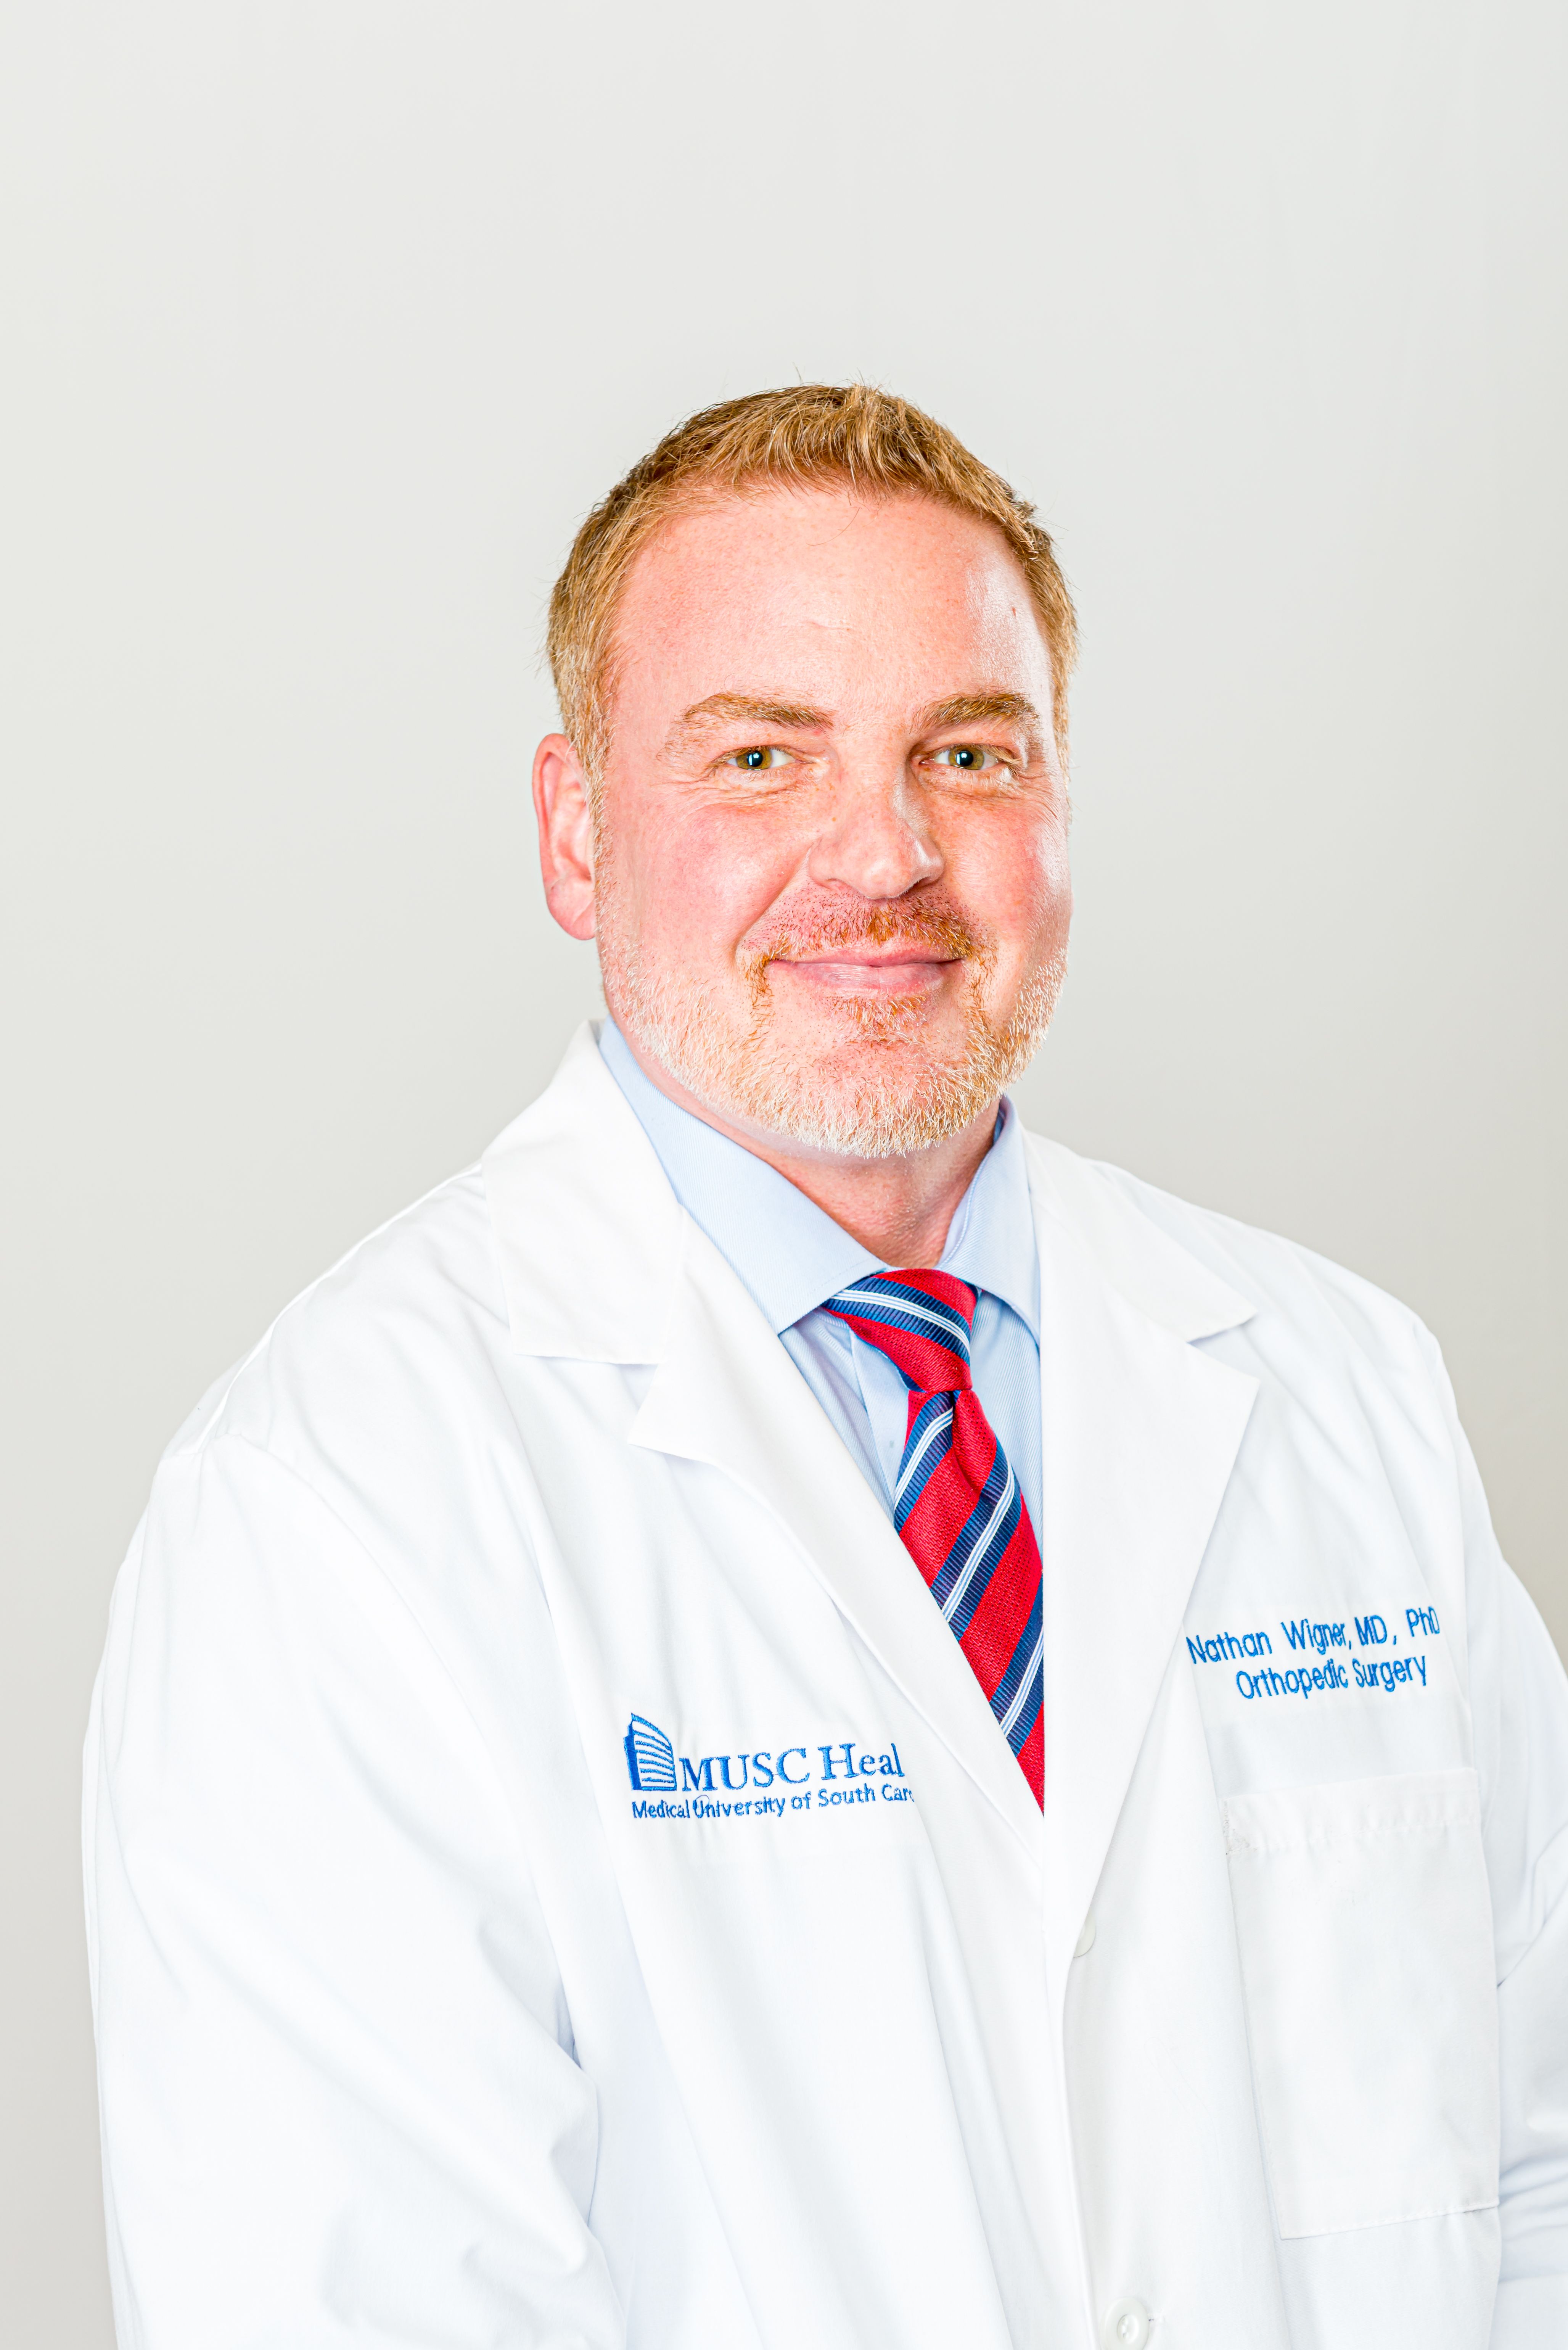 Photo of Nathan Wigner, M.D., PhD